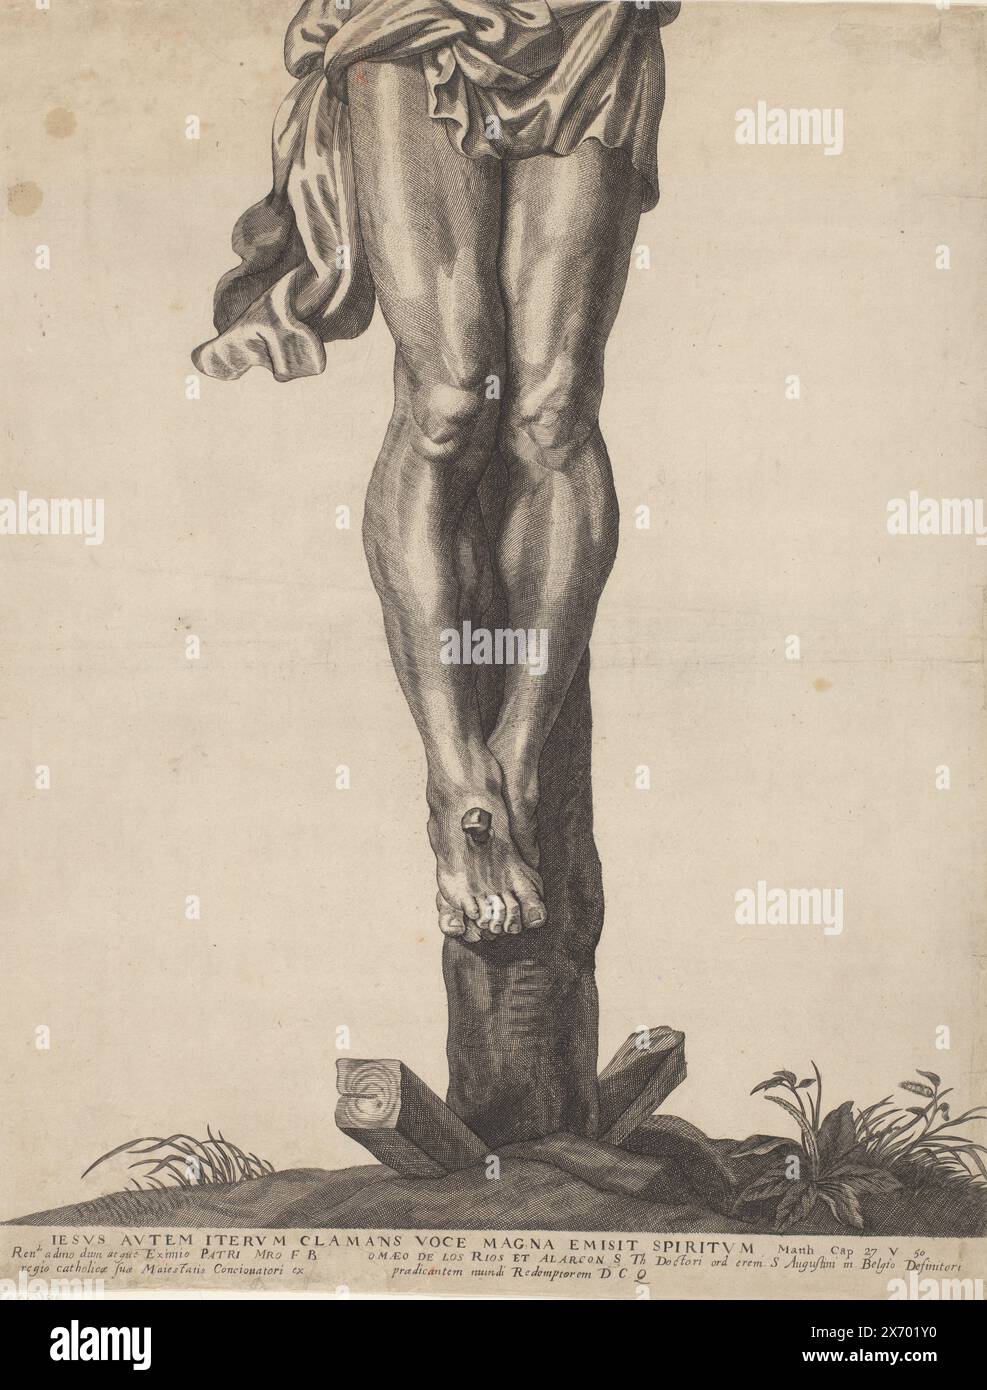 Christ on the cross, Series of Ecce Homo, the crucified Christ, Virgin Mary and John the Evangelist (series title), Bottom plate. In the foreground of the print is Christ on the cross. He looks desperately to the sky. There is an inscription nailed to the top of the cross. It says 'Jesus of Nazareth, King of the Jews' in Hebrew, Greek and Latin. The print has a Latin caption., print, print maker: Mattheus Borrekens, after drawing by: Erasmus Quellinus (II), publisher: Martinus van den Enden, Antwerp, 1625 - 1670, paper, engraving, width, 406 mm × height, 532 mm Stock Photo